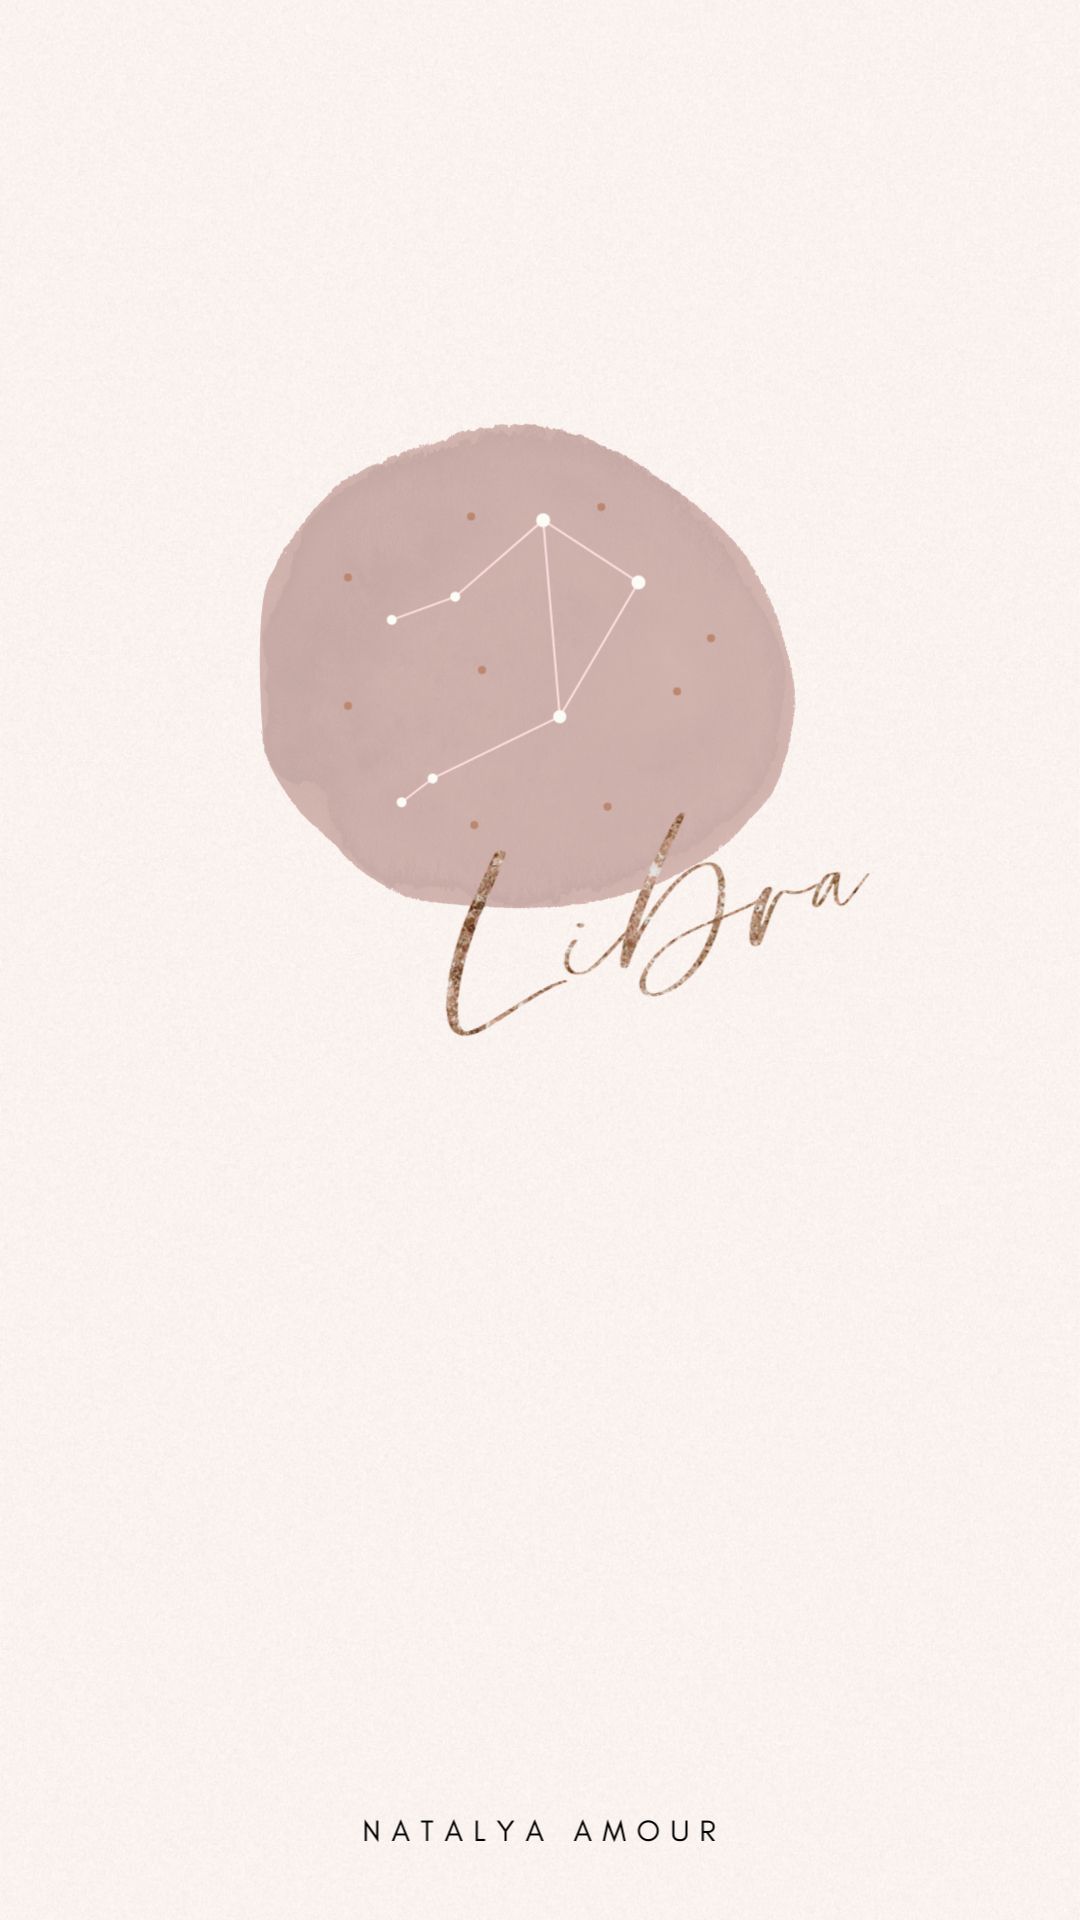 Phone wallpaper with the zodiac sign of Libra. - Libra